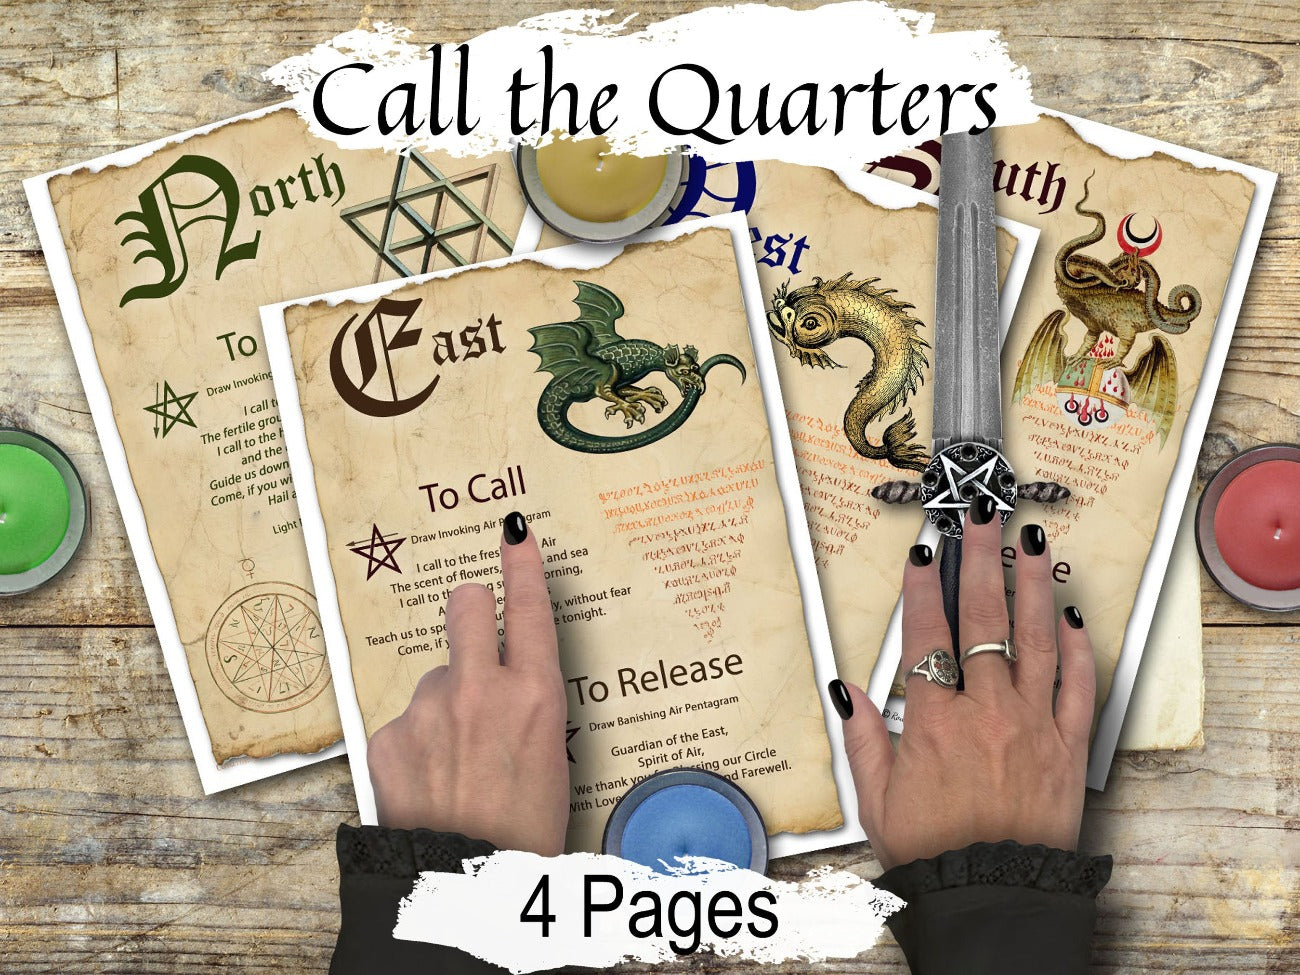 CALL the QUARTERS, Cast a Magic Circle, Call and Dismiss Quarters, Wicca Watchtowers, Make Sacred Space, Witchcraft Pentagram Magic, 4 Pages - Morgana Magick Spell